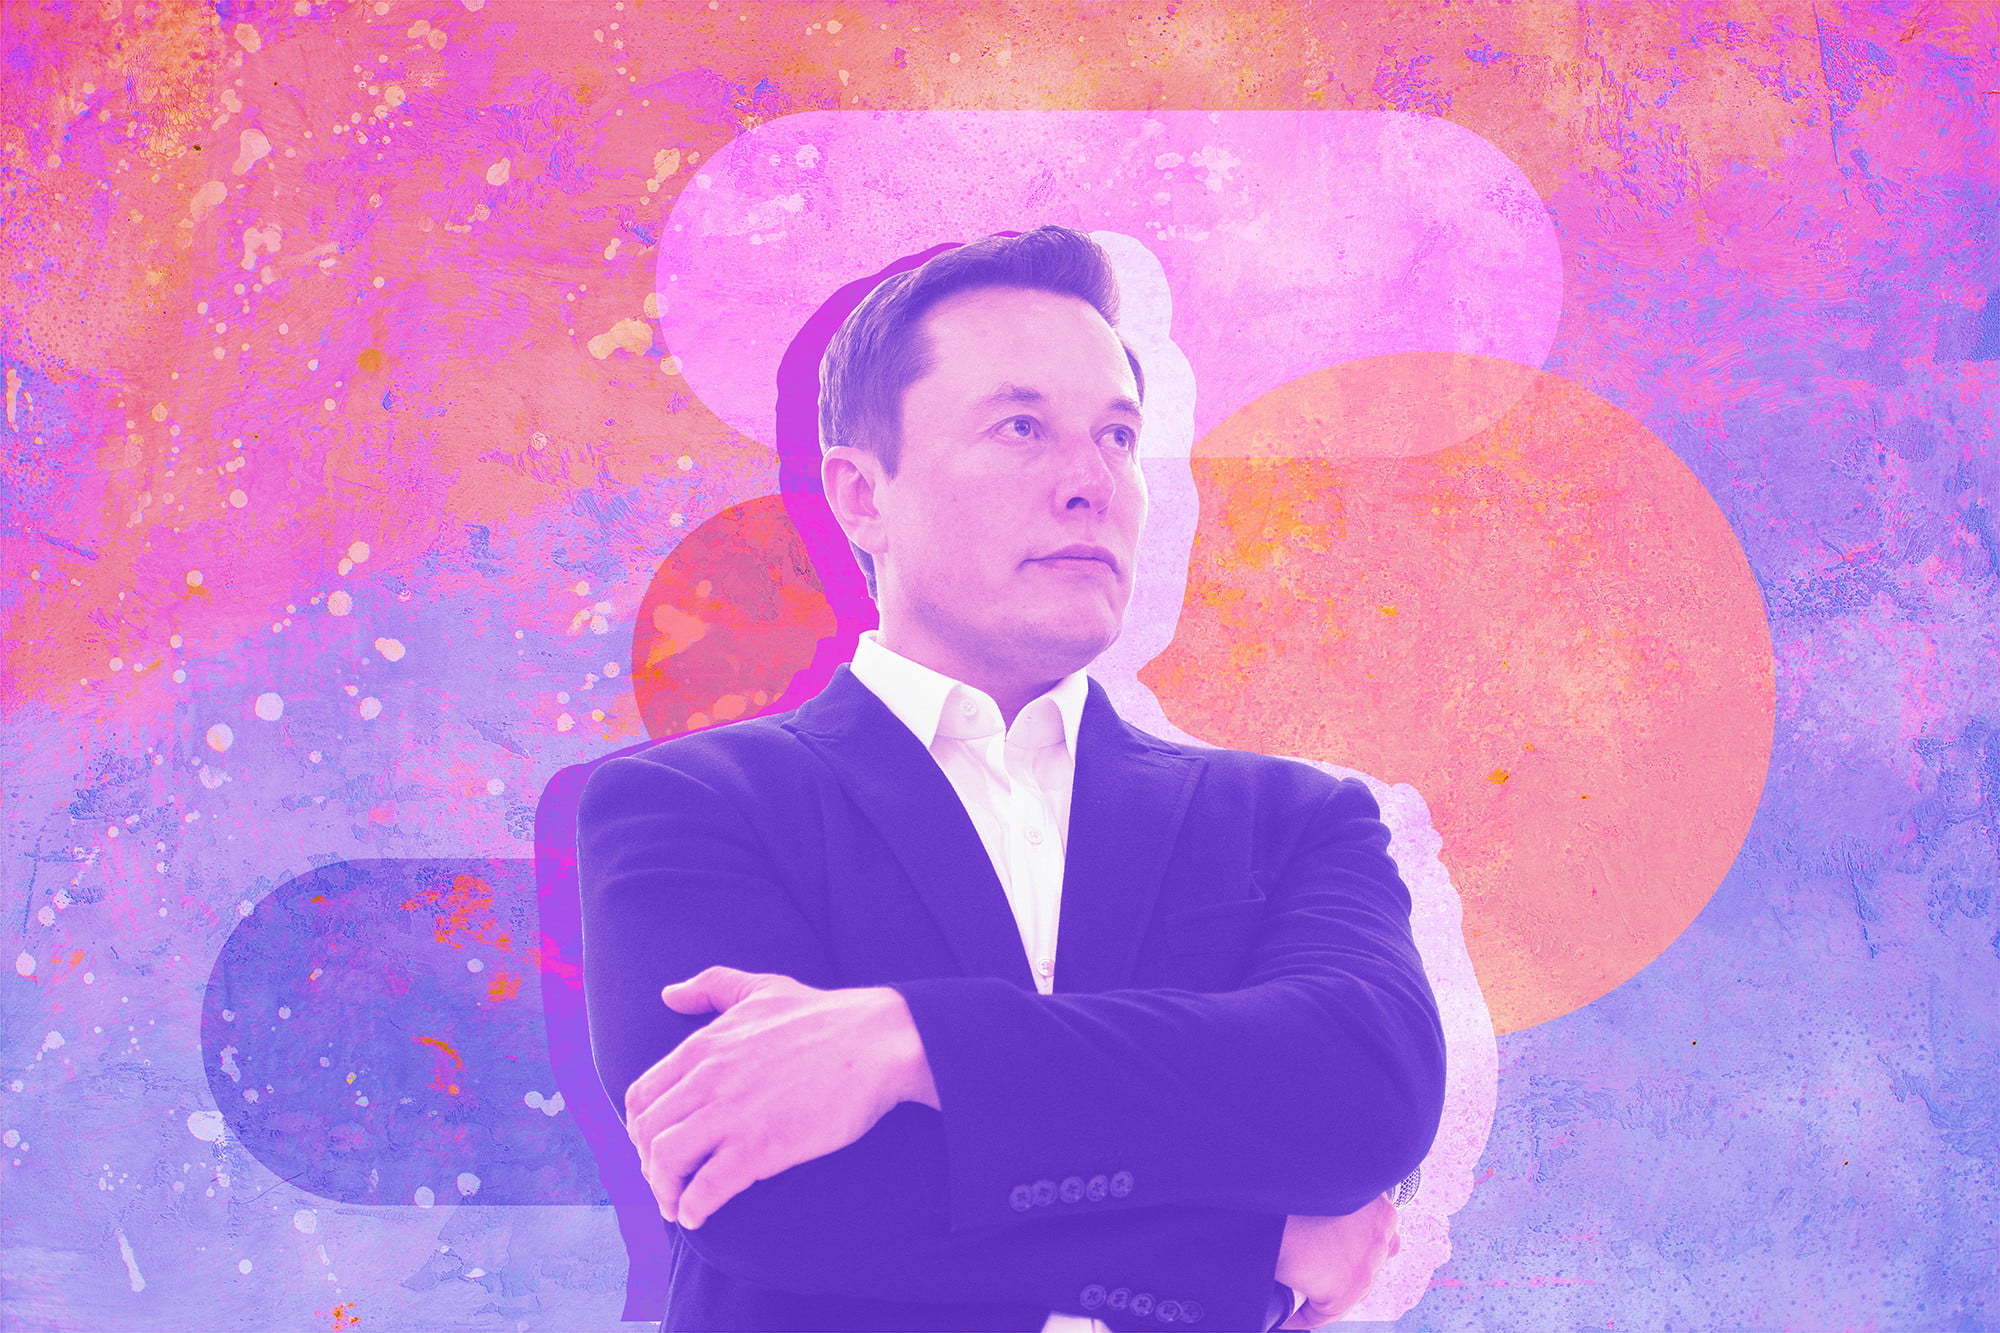 Will Elon Musk give media the warning sign they (we) want | Virtual Traits